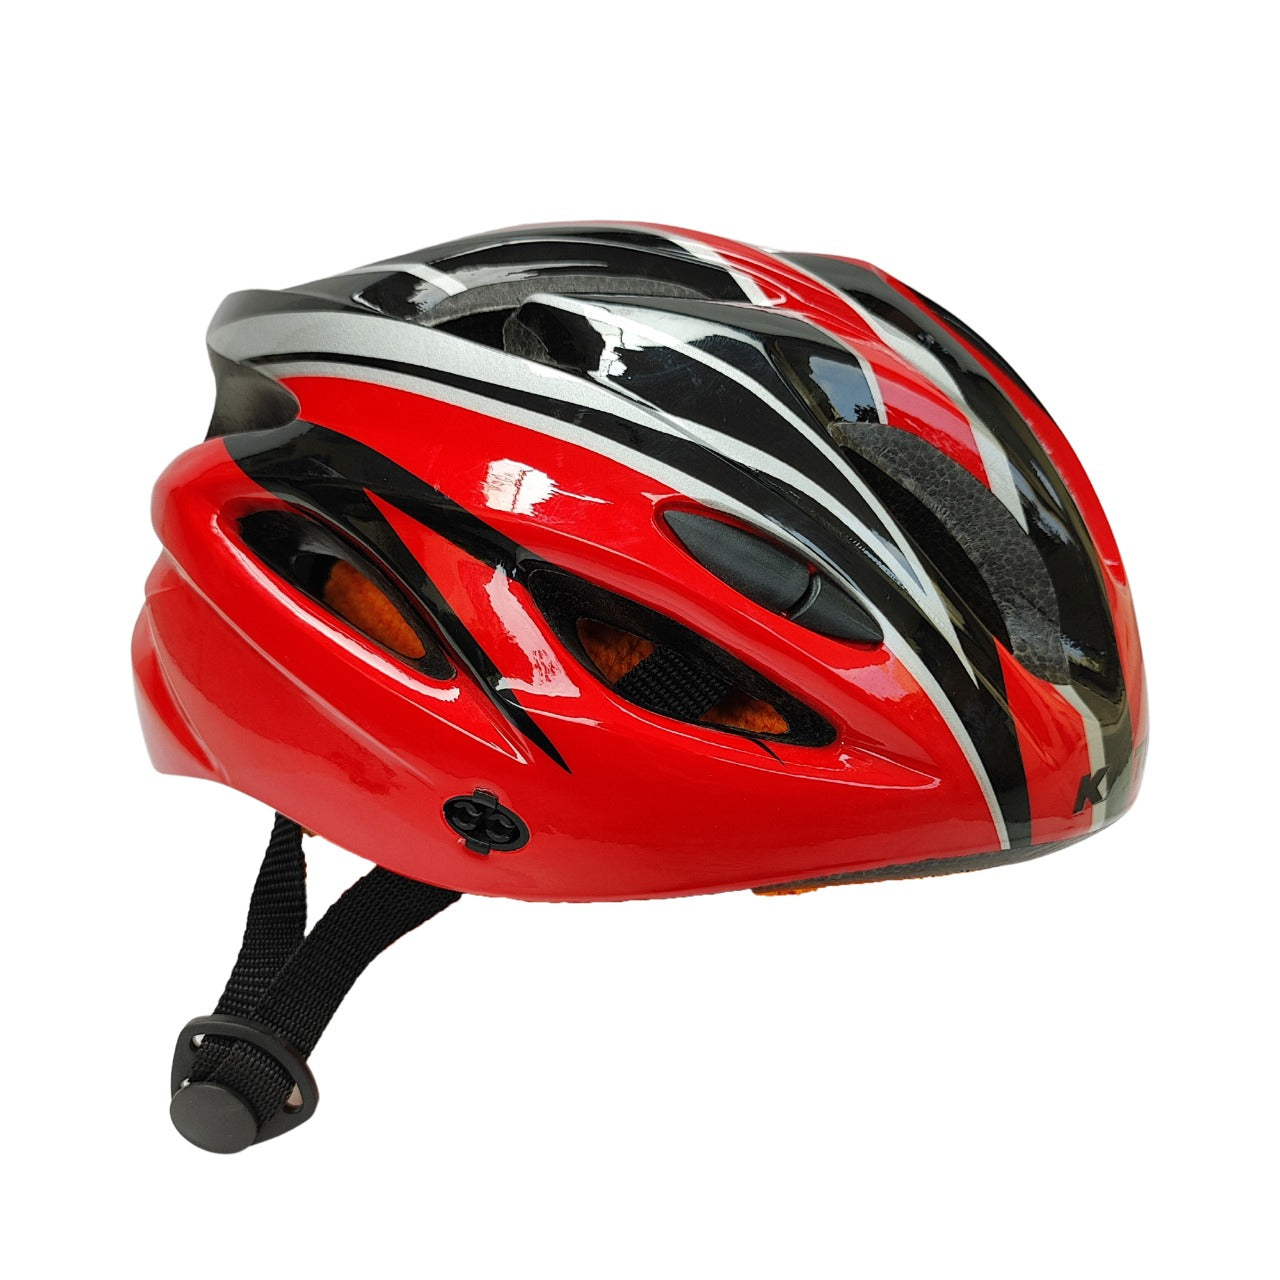 Bicycle helmet red color side view by omobikes